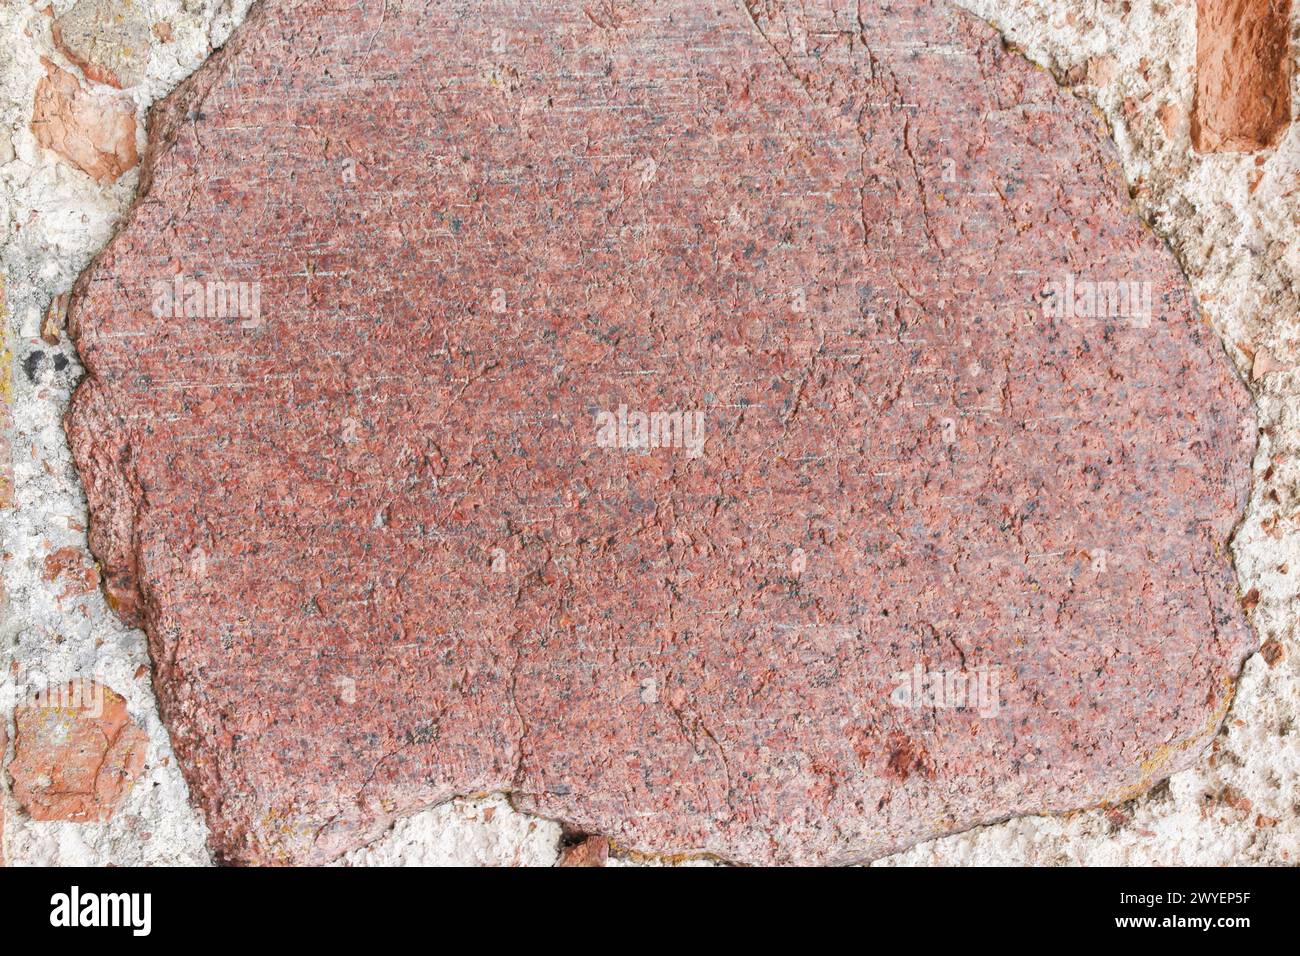 A large stone built into a brick wall. Stock Photo